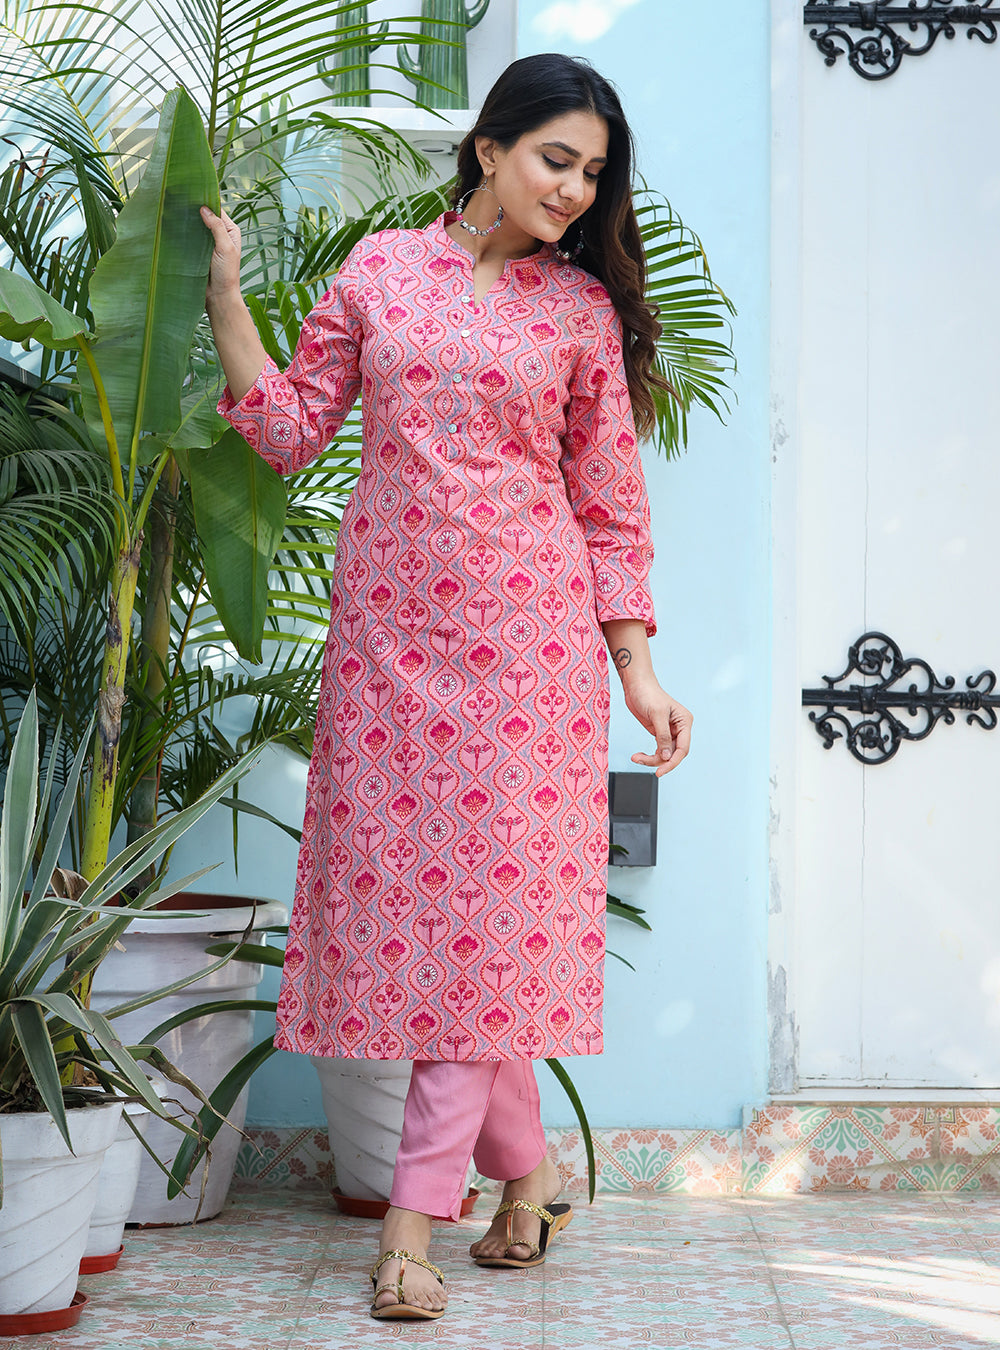 Ethnic Cotton Dress - Buy a Pink Women's Kurti and Pants Online